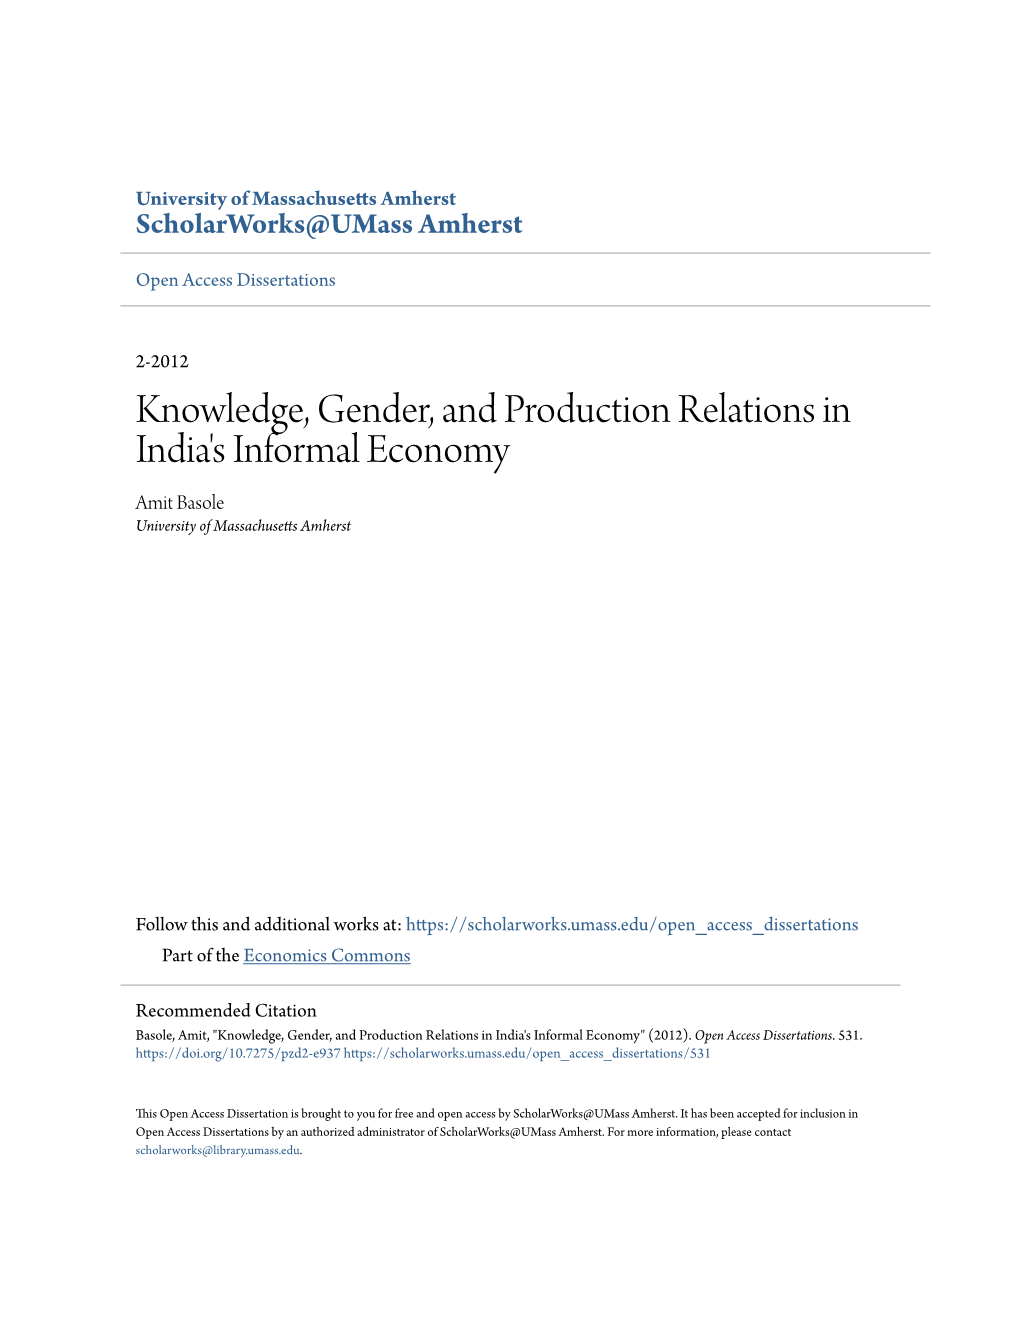 Knowledge, Gender, and Production Relations in India's Informal Economy Amit Basole University of Massachusetts Amherst